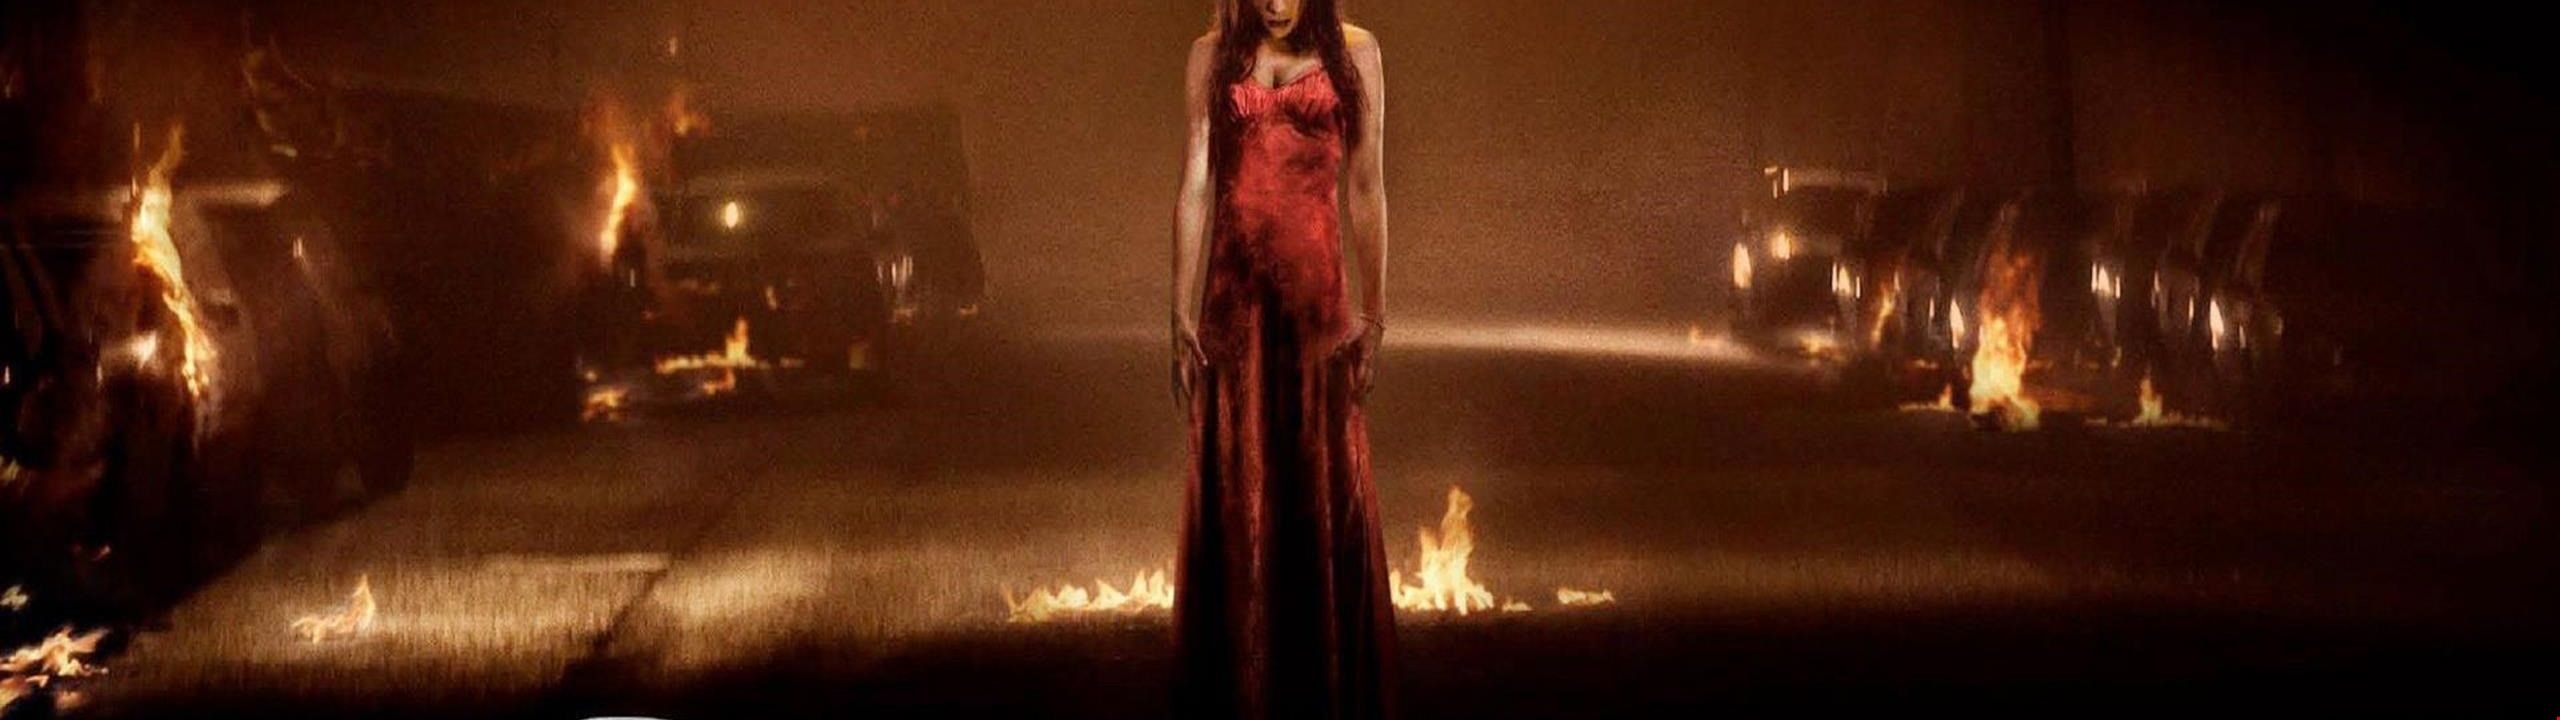 Halloween Movie Wallpapers - Carrie 2013 , HD Wallpaper & Backgrounds